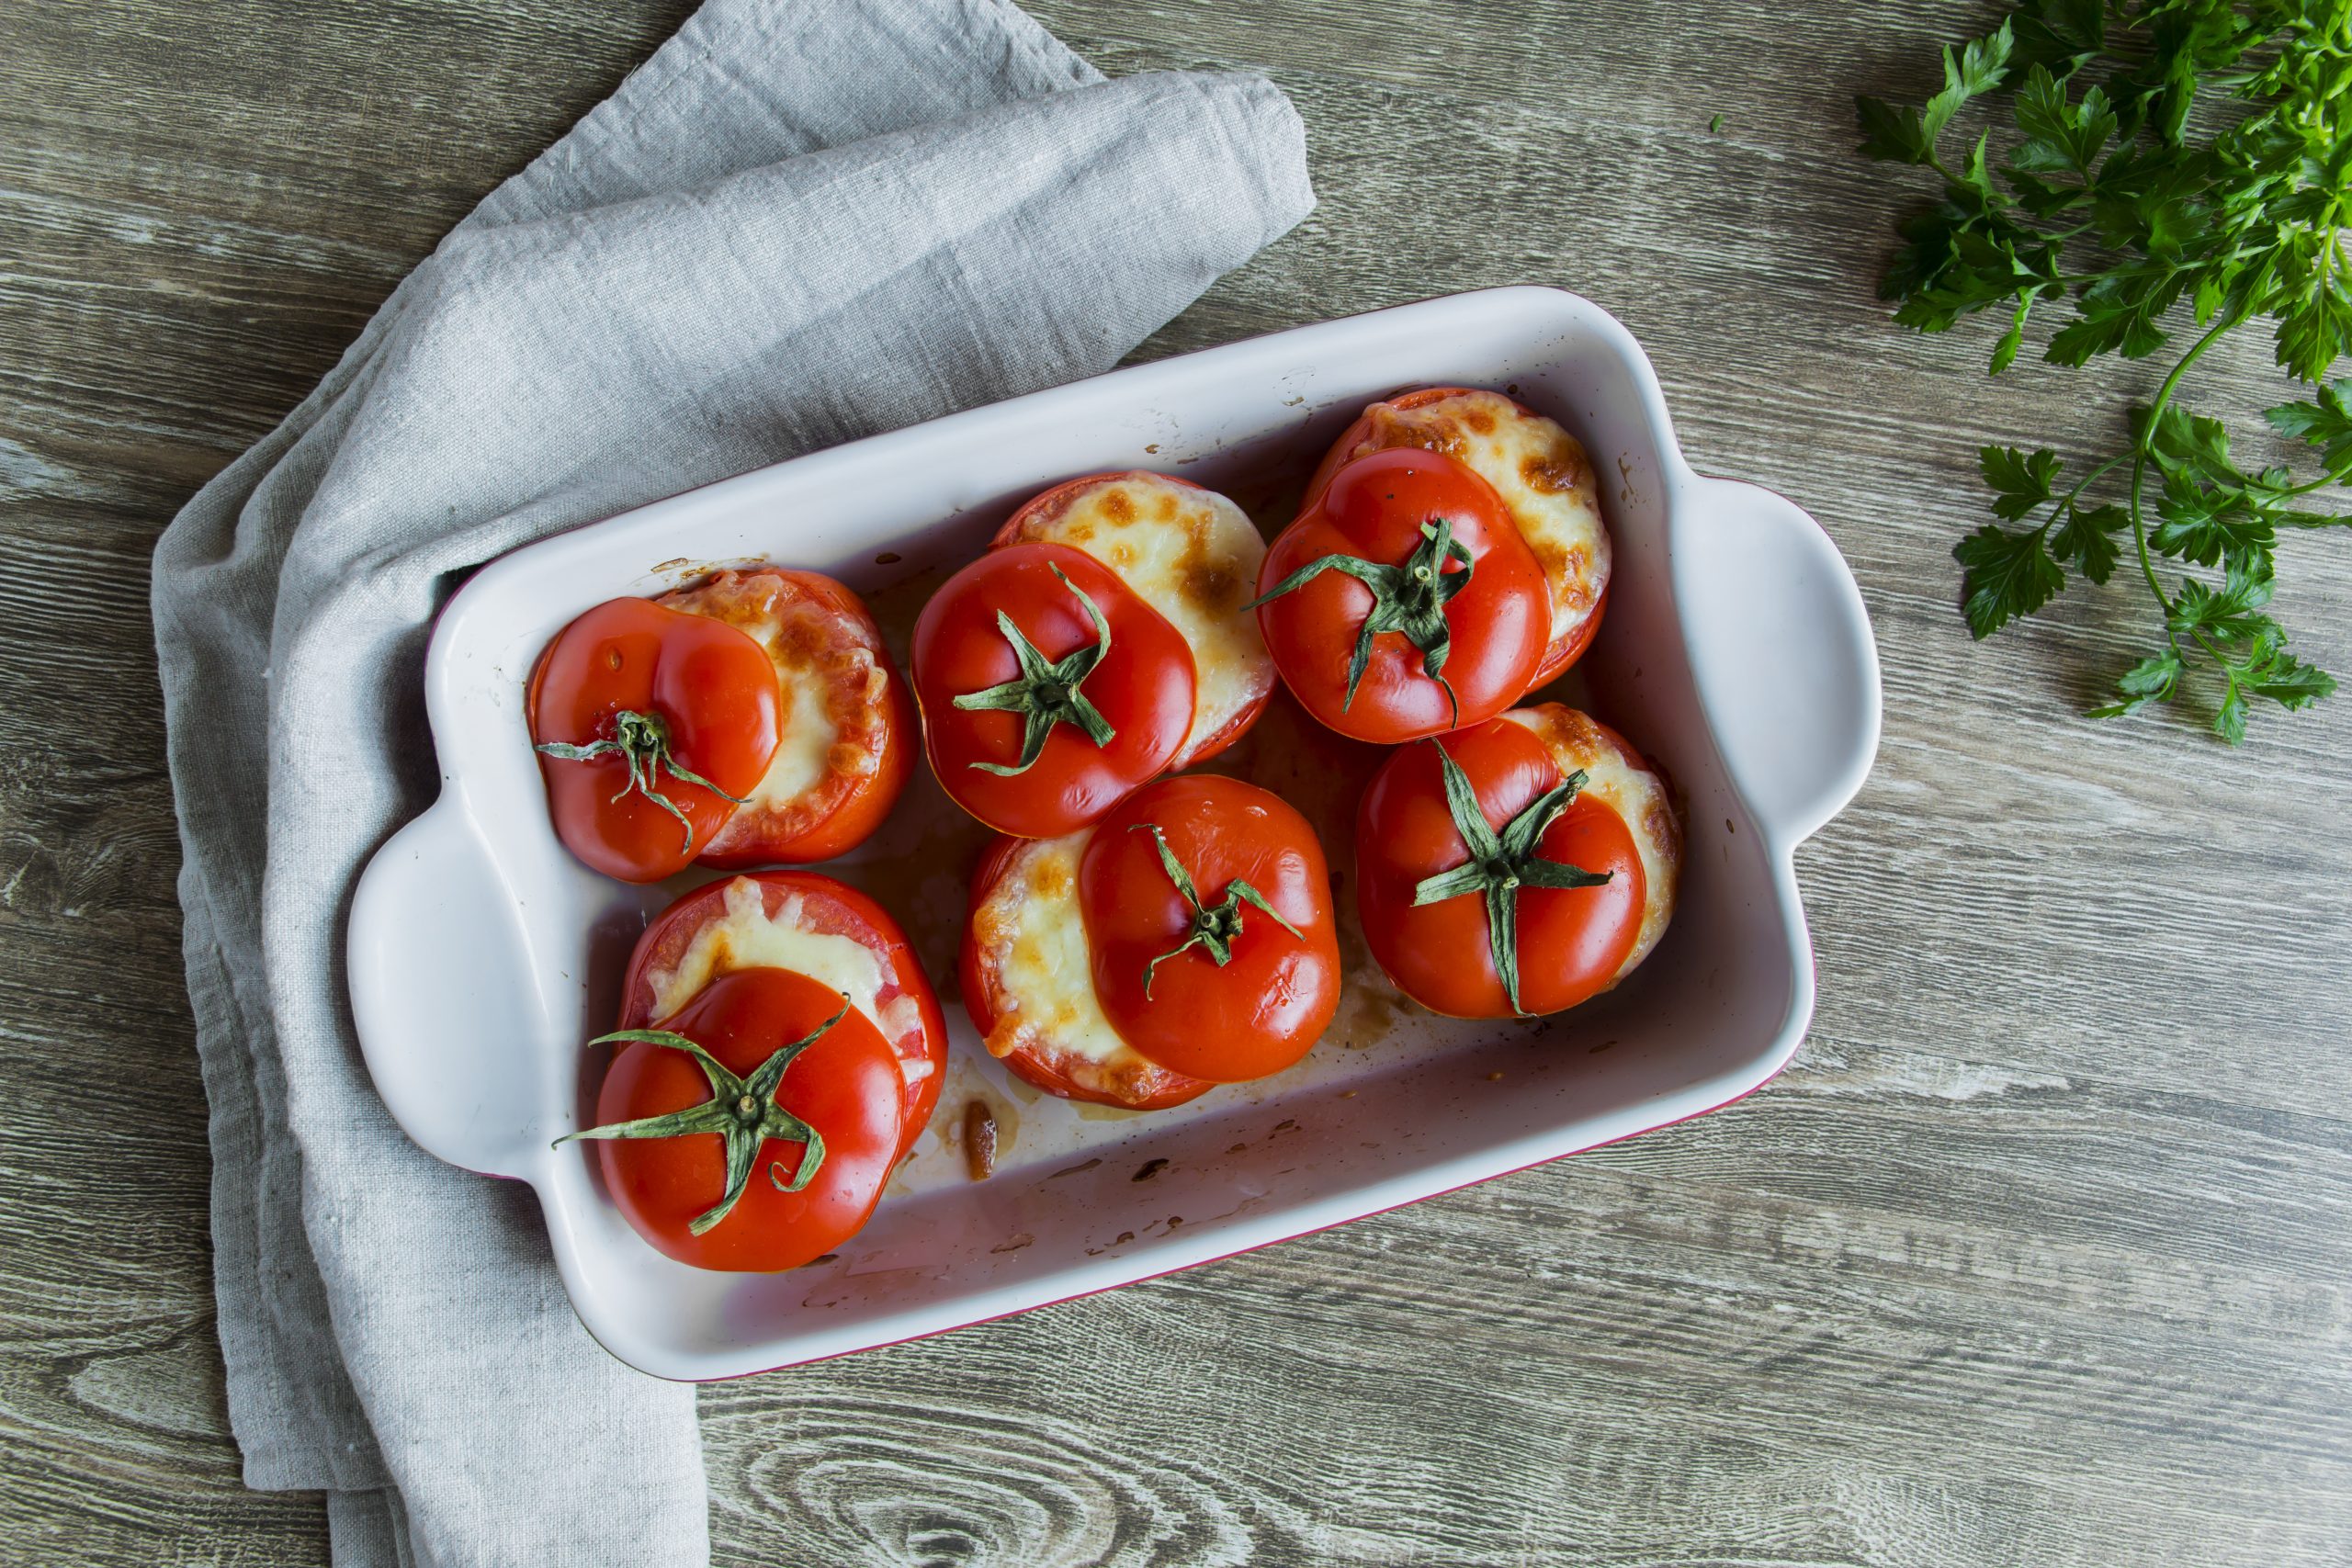 Stuffed,Baked,Whole,Tomatoes,With,Cheese